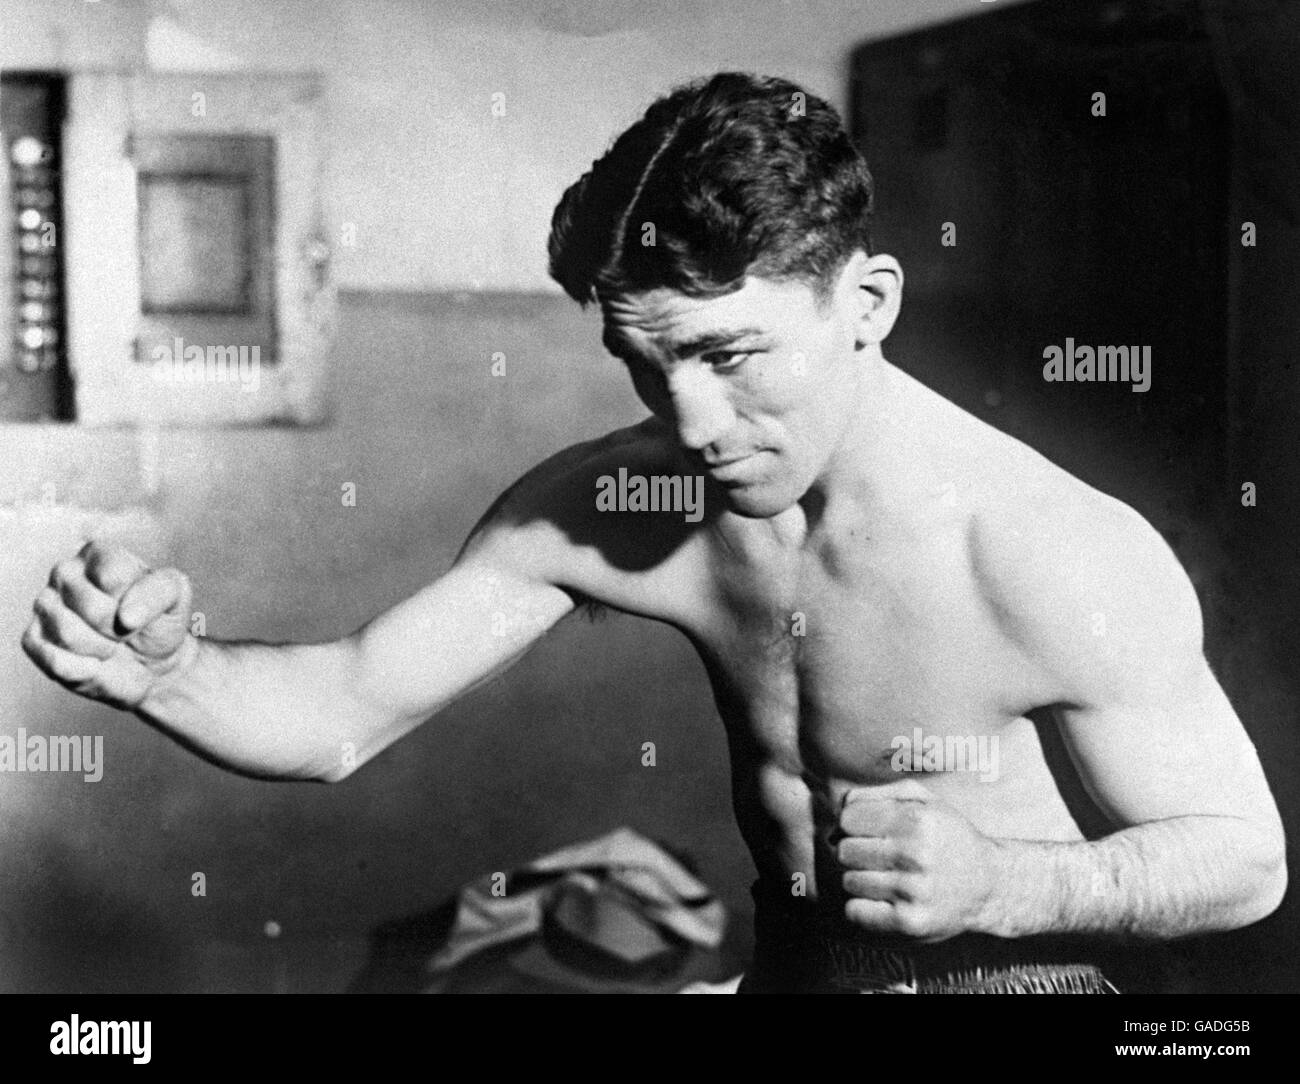 Sport - Boxing - US Boxer's in the 1930's. Christopher Battaglia, aka 'Battling Battalino' seen in a New York gym in 1930. he boxed in the featherweight division. Stock Photo